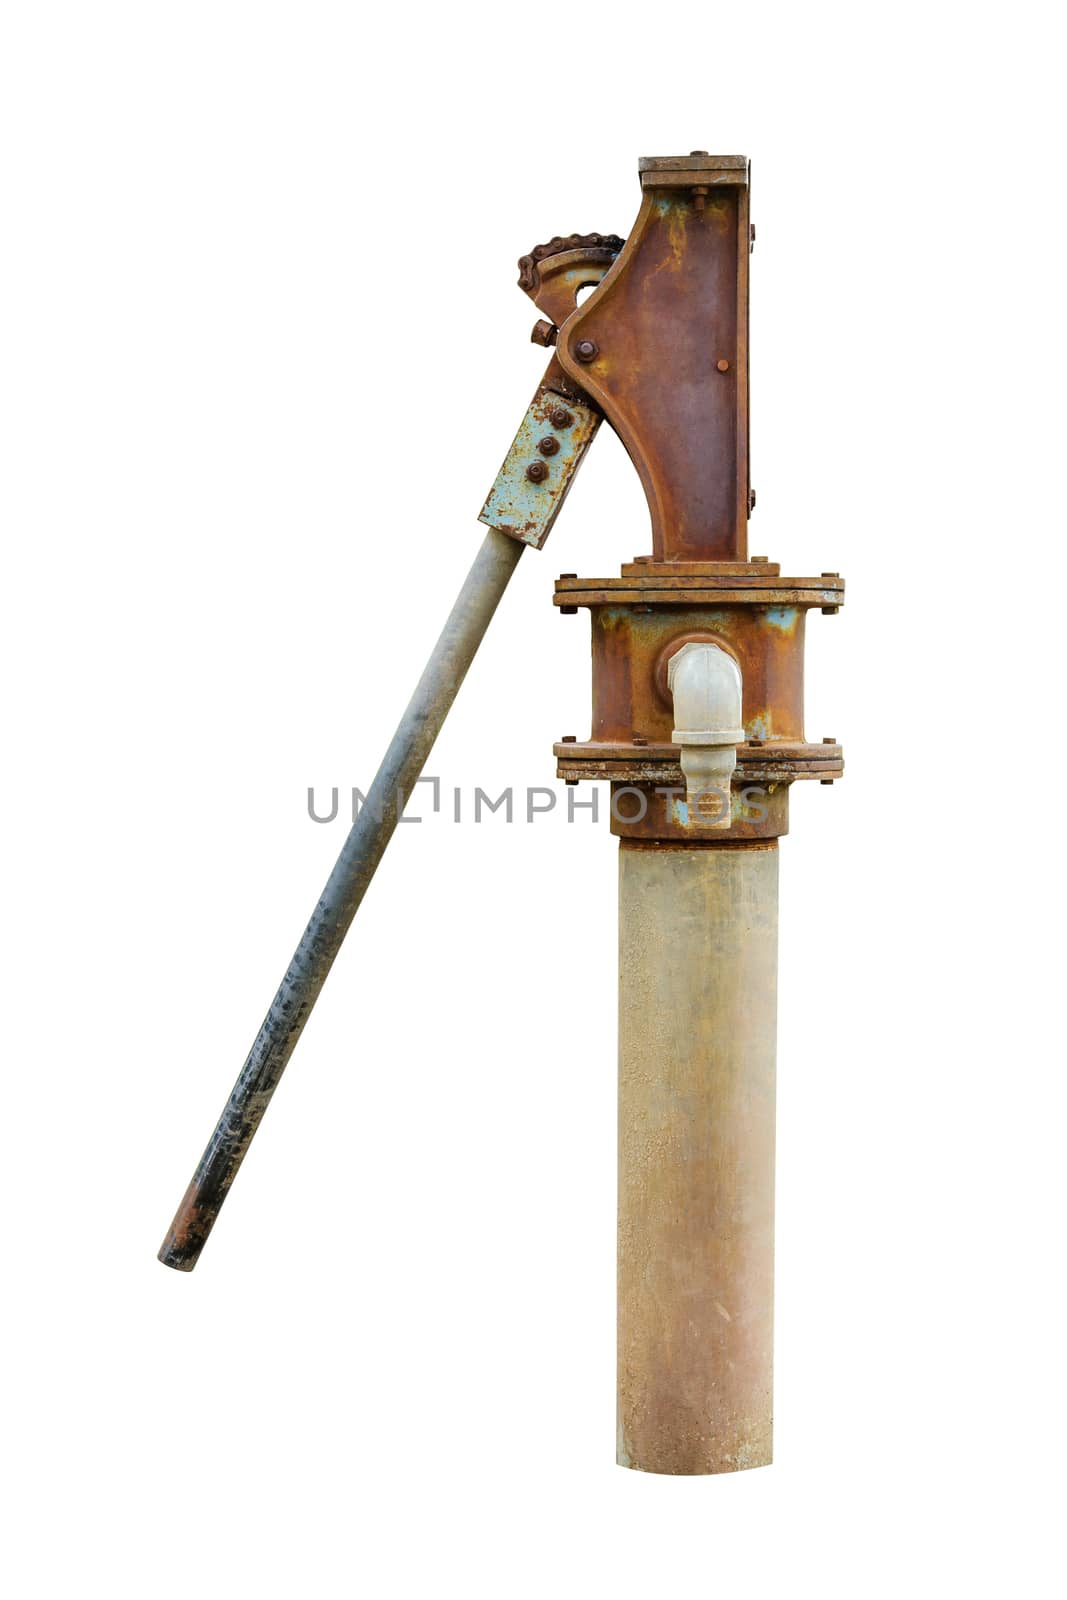 Old aged rusty water pump isolated close up on white background